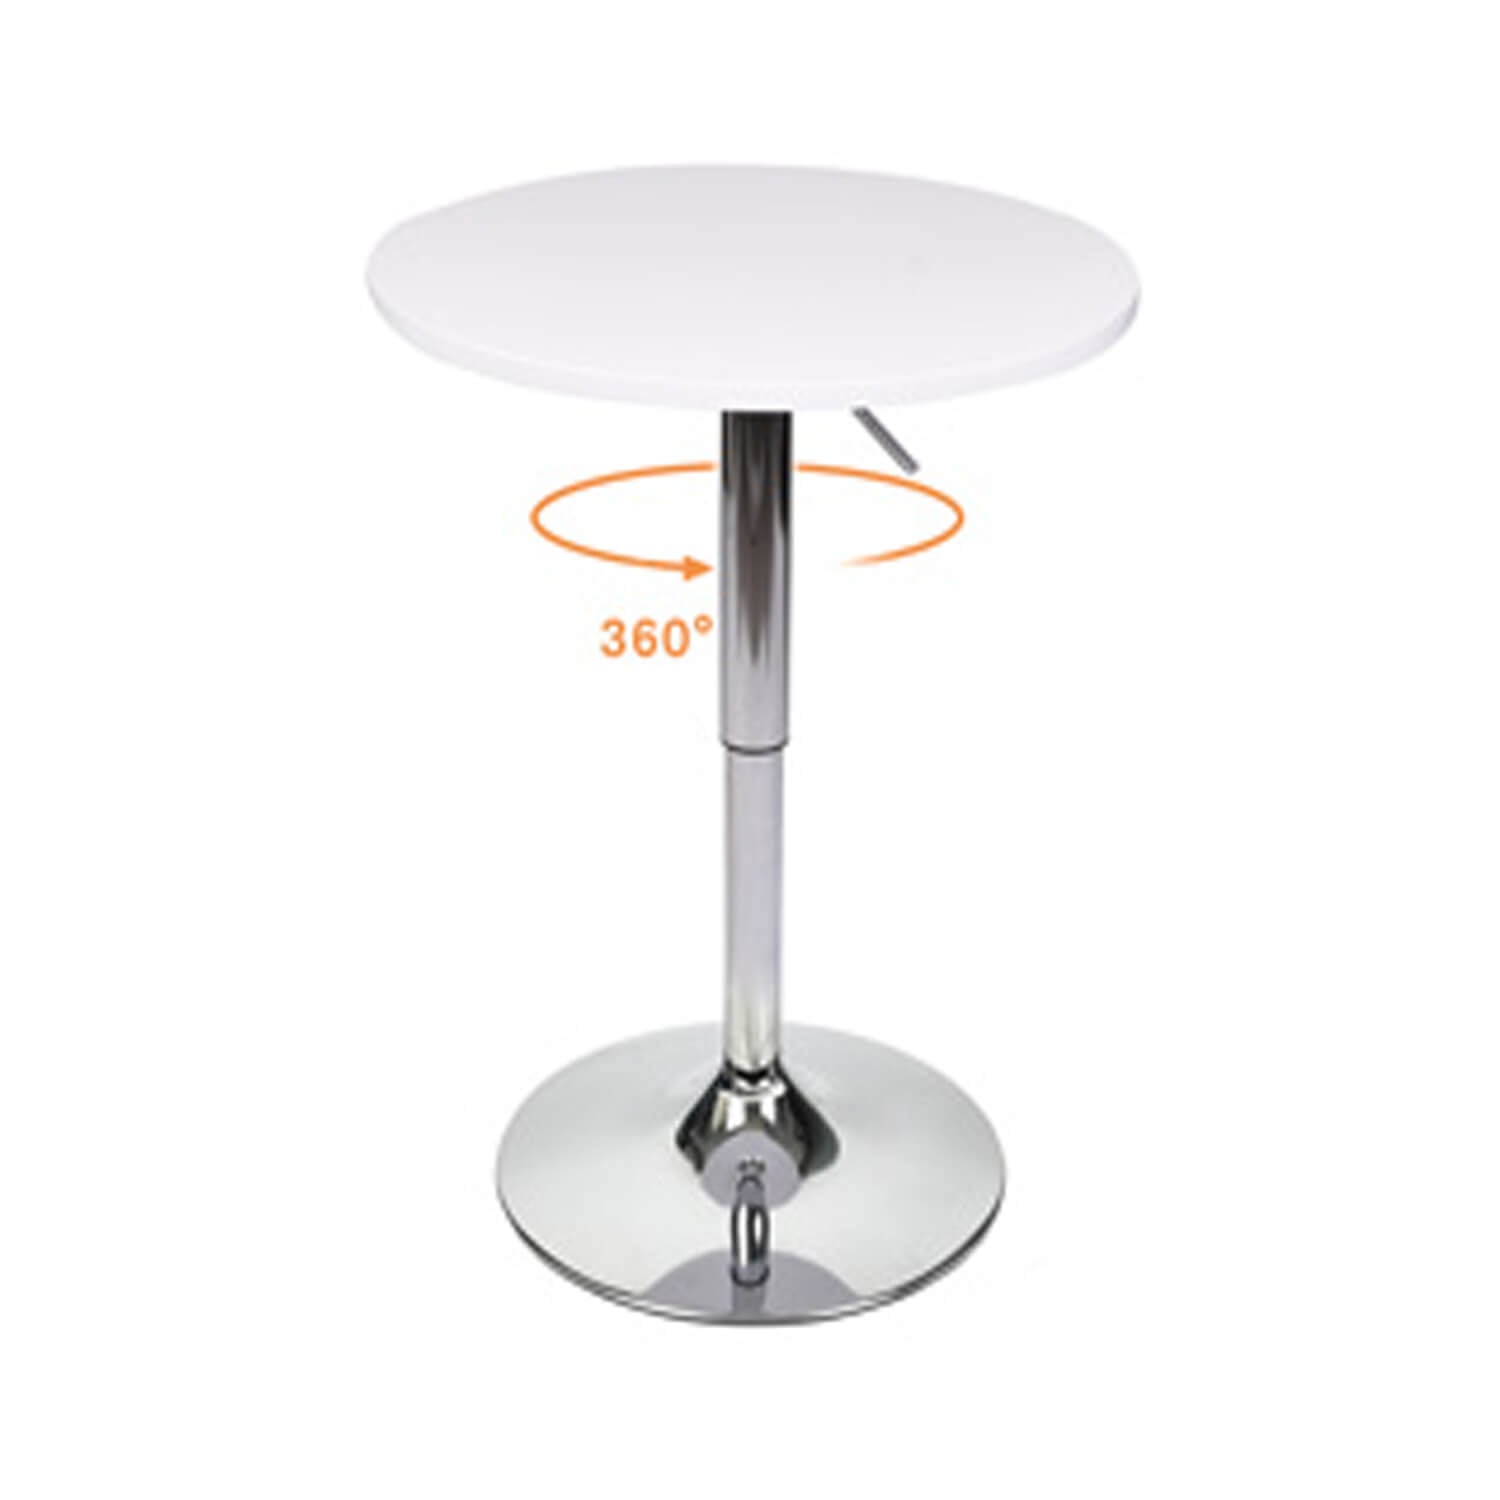 Elecwish white bar table can swivel 360 degrees